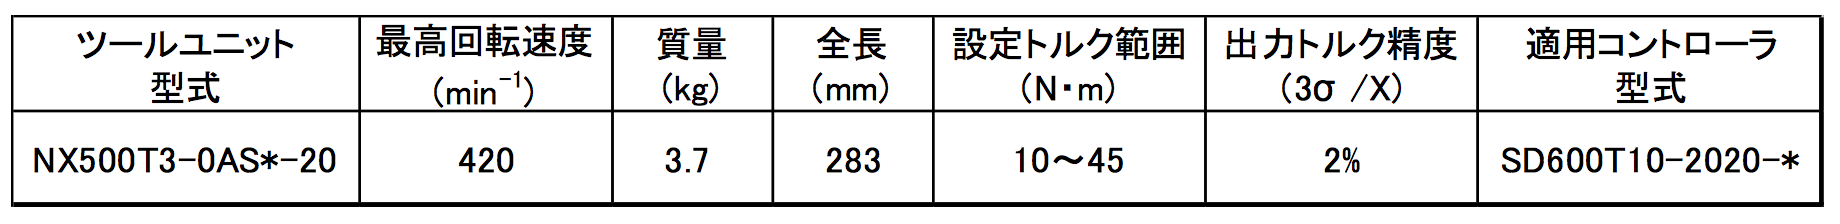 specification of tool unit  2018-12-20 14.01.12.png